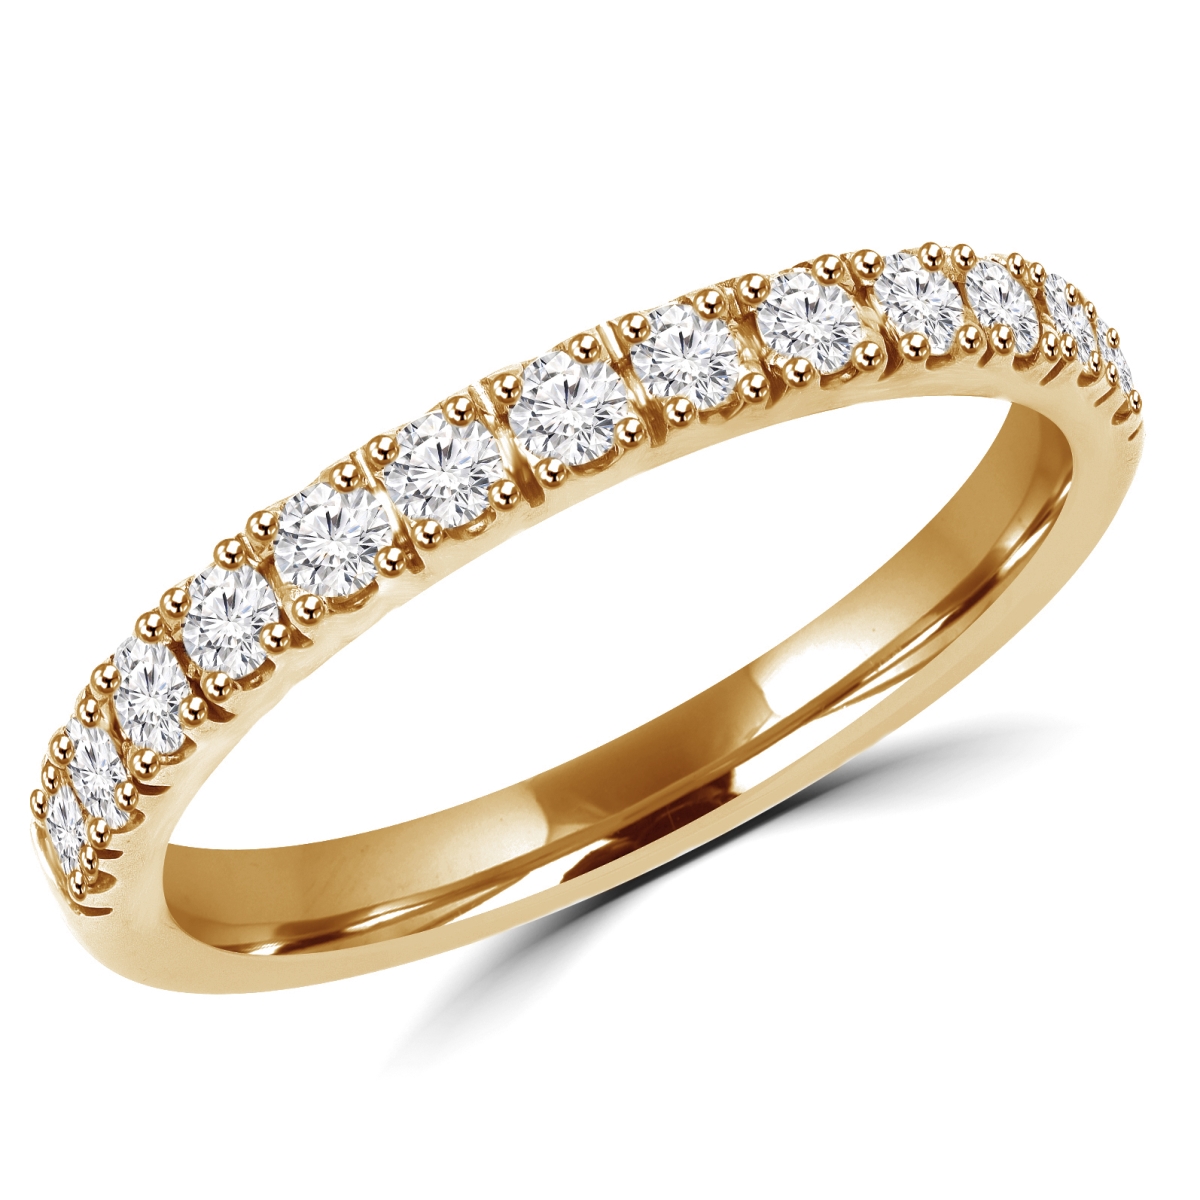 Picture of Majesty Diamonds MD180187-4.25 0.3 CTW Round Diamond Semi-Eternity Wedding Band Ring in 14K Yellow Gold - Size 4.25